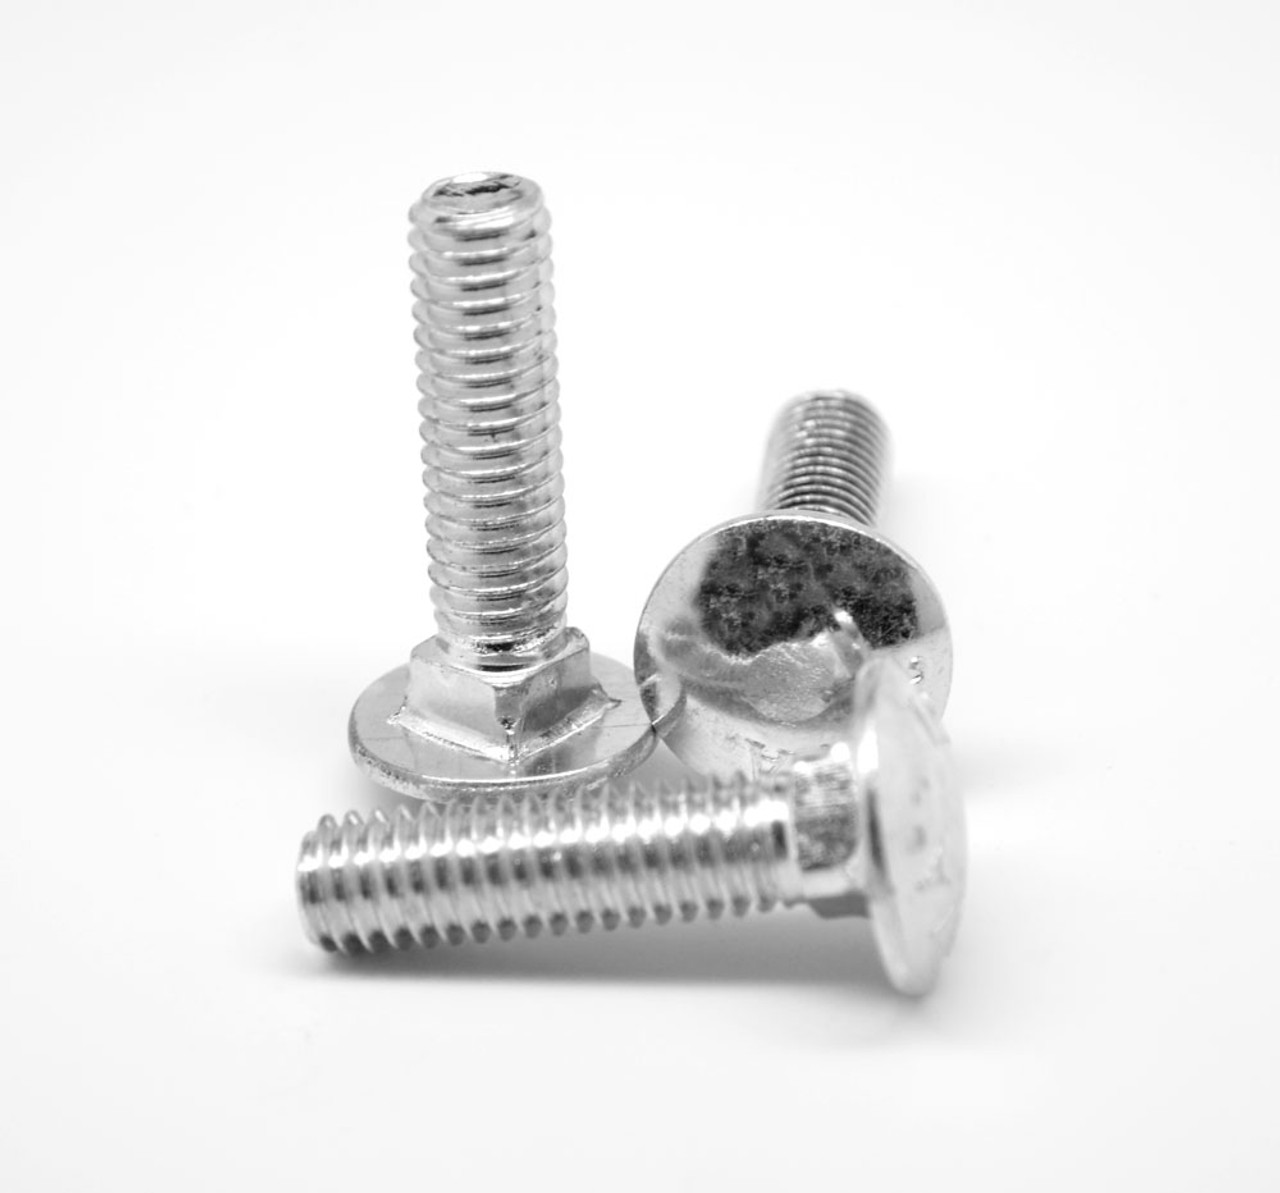 M12 x 1.75 x 90 MM (FT) Coarse Thread DIN 603 Class 4.6 Carriage Bolt Low Carbon Steel Zinc Plated